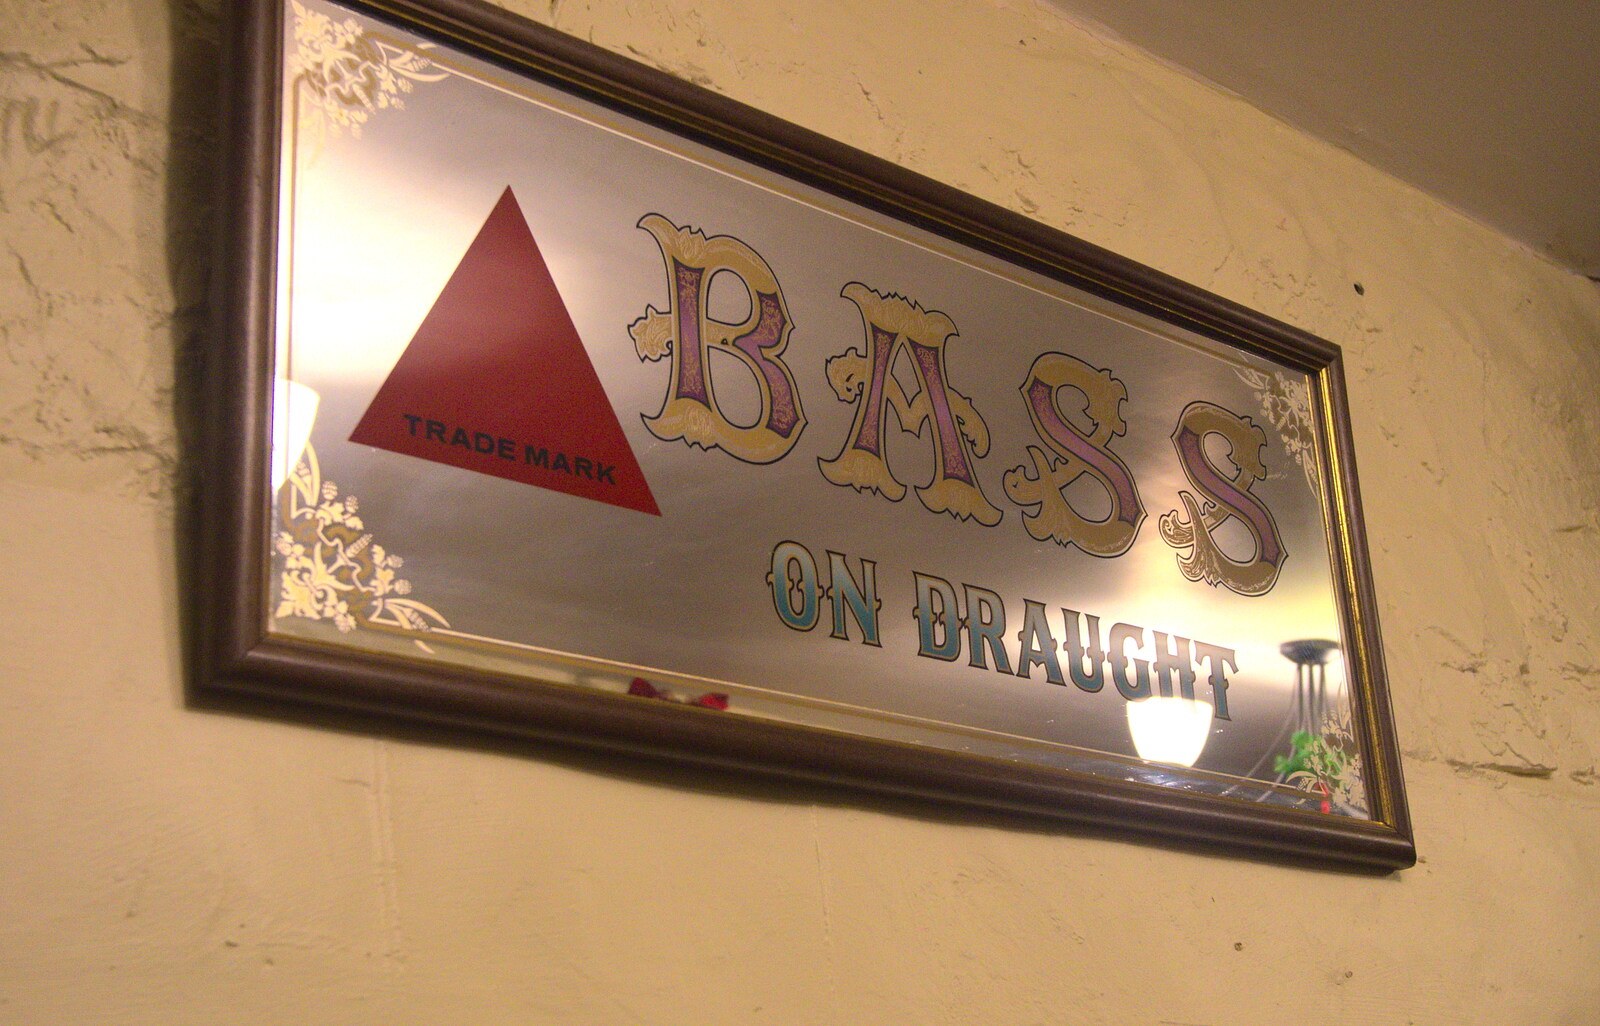 A 'Bass on Draught' mirror advert from The Boxing Day Hunt, Chagford, Devon - 26th December 2012